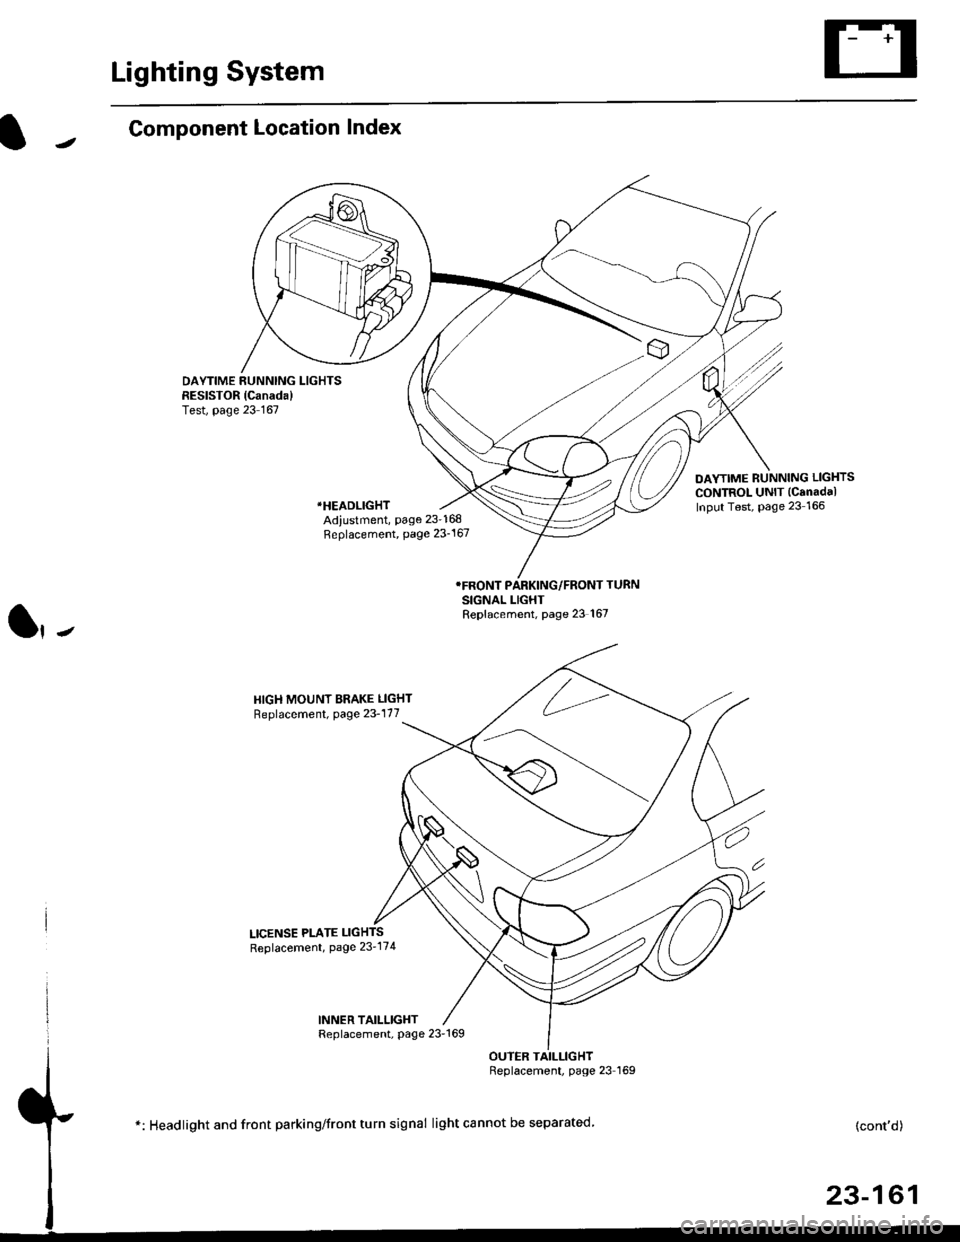 HONDA CIVIC 1998 6.G Workshop Manual Lighting System
Component Location Index
DAYTIME RUNNING LIGHTSRESISTOR {Canada)Test, page 23 167
DAYTIME RUNNING LIGHTS
CONTROL UNIT (Canadal
Input Test, Page 23 166*HEADLIGHT
Adiustment, page 23-168